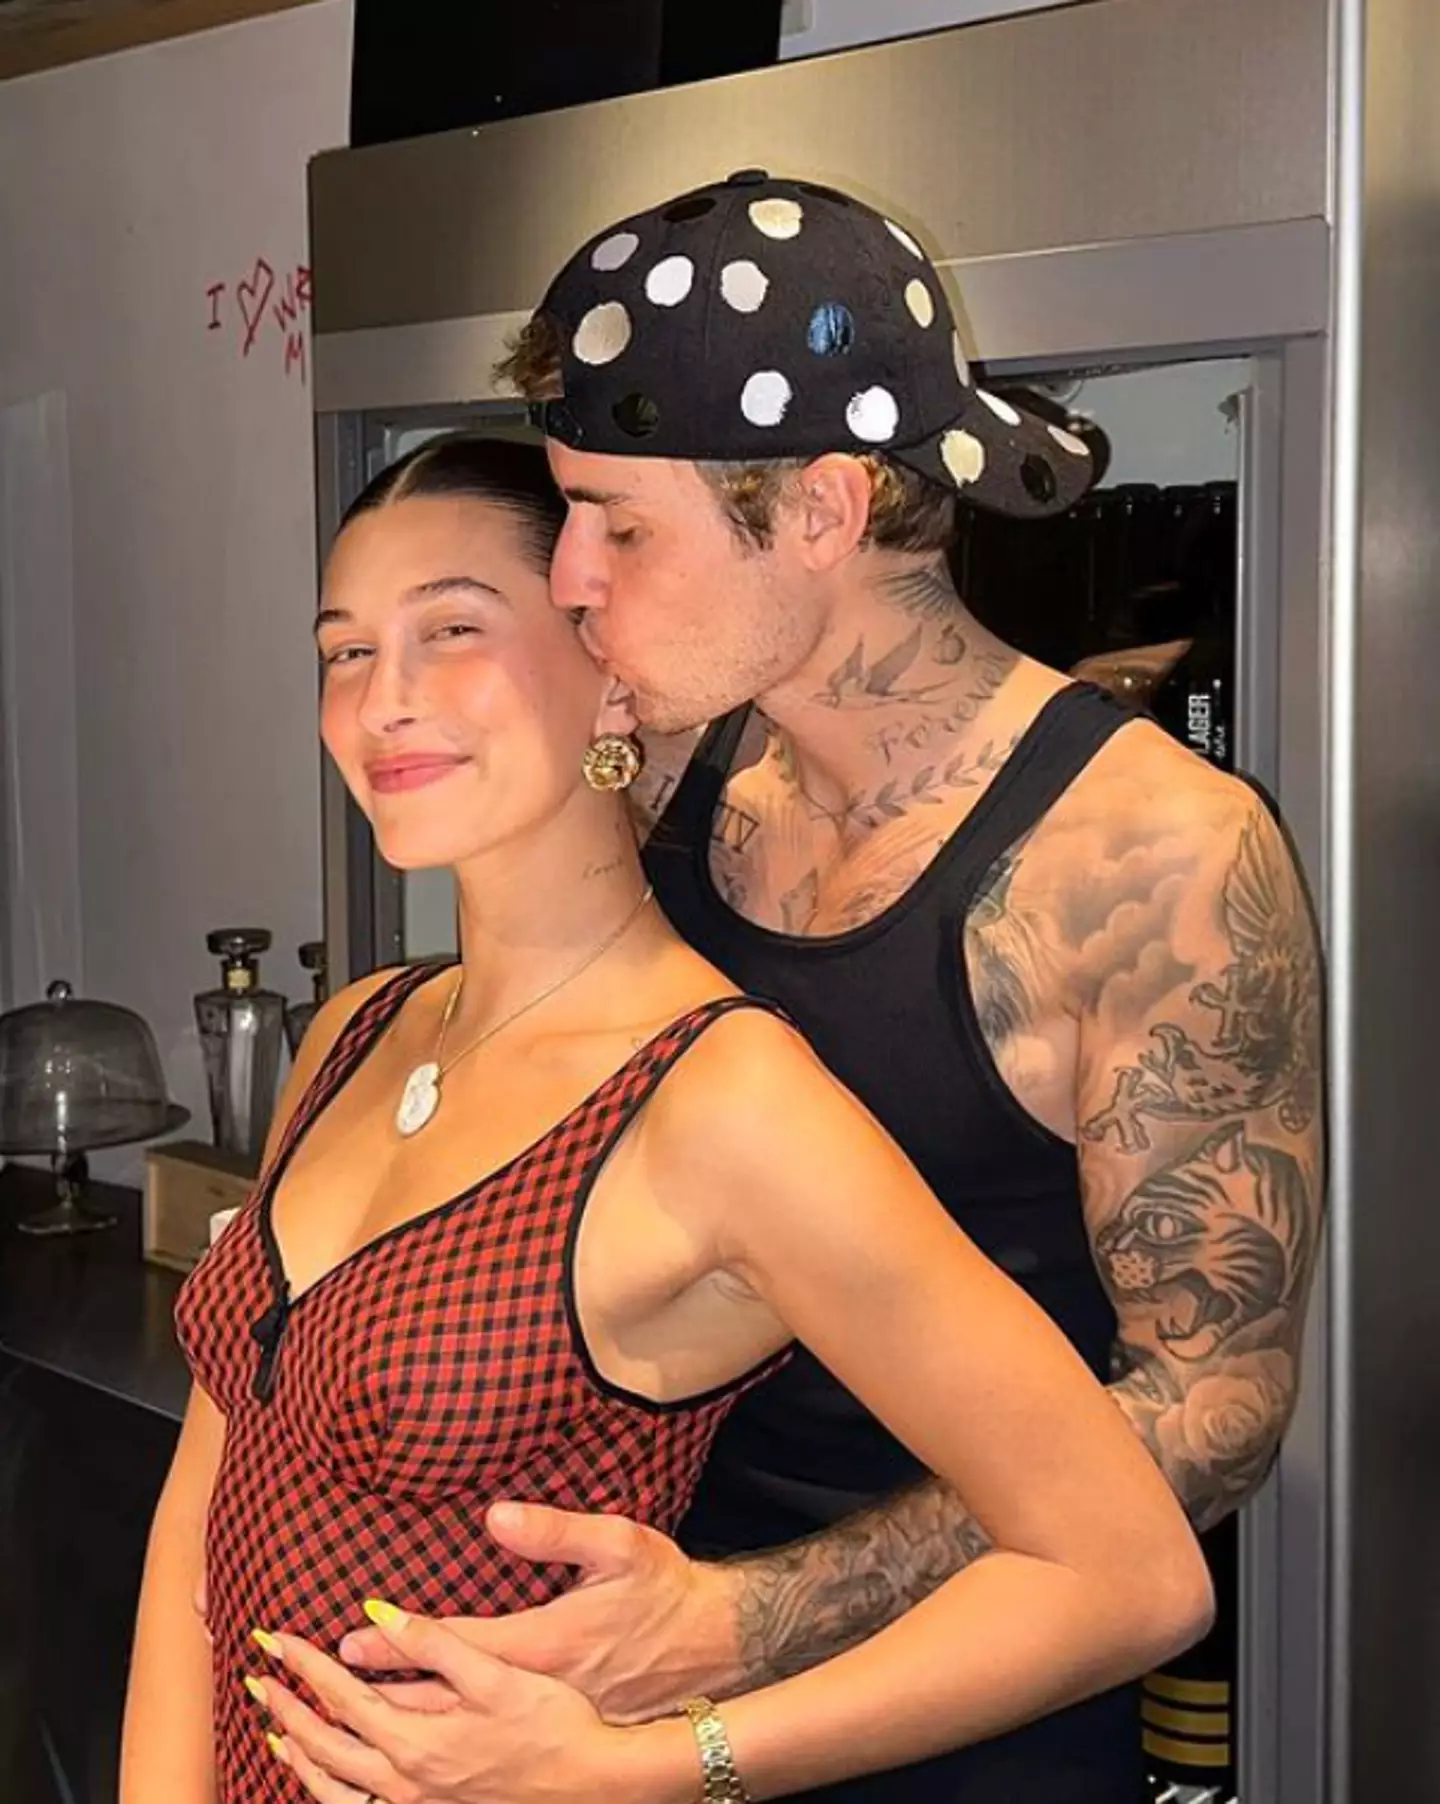 Hailey says the internet would be 'the last to know about it' if she does get pregnant.